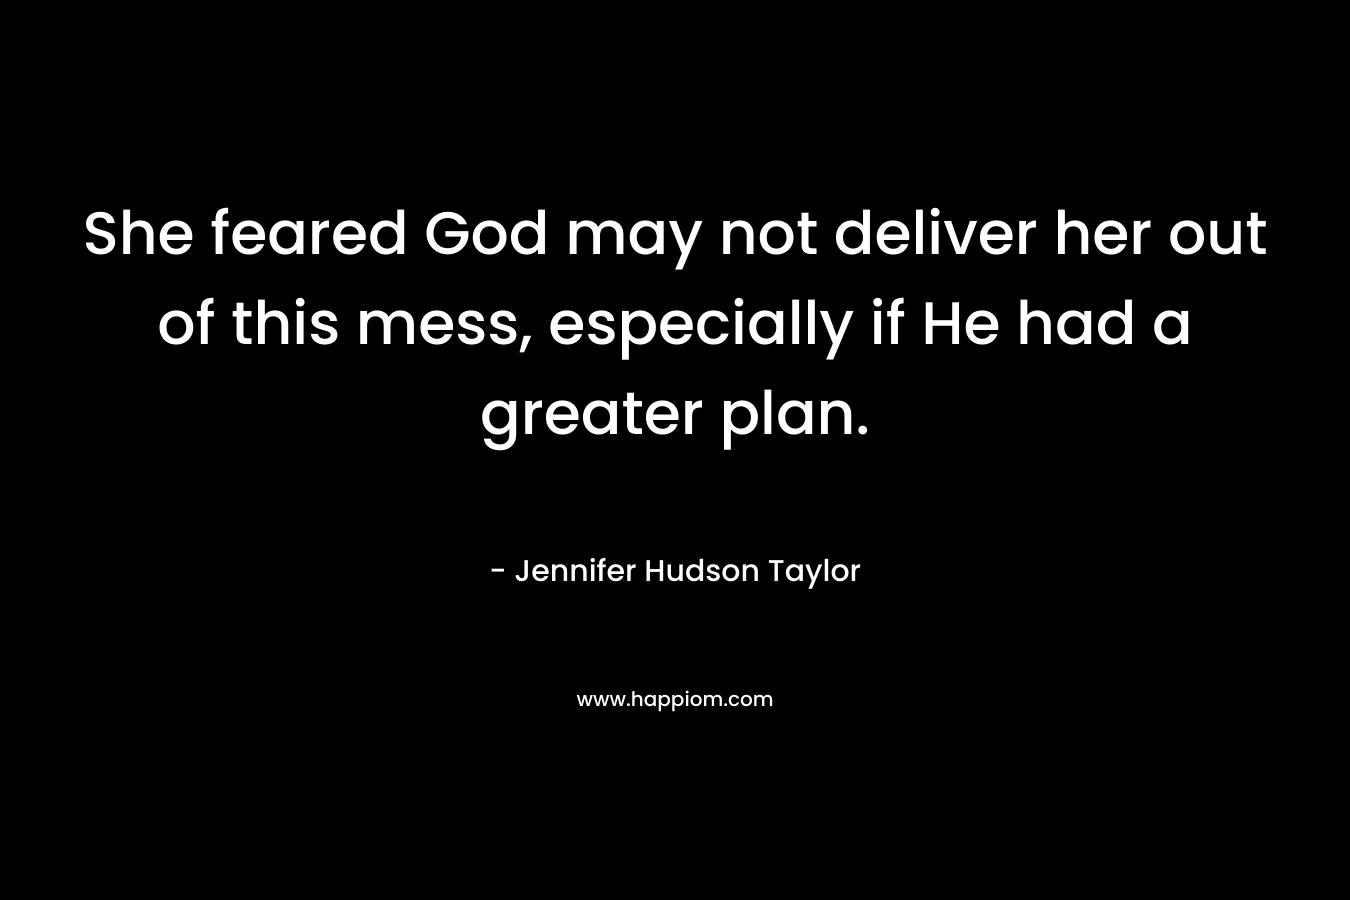 She feared God may not deliver her out of this mess, especially if He had a greater plan. – Jennifer Hudson Taylor